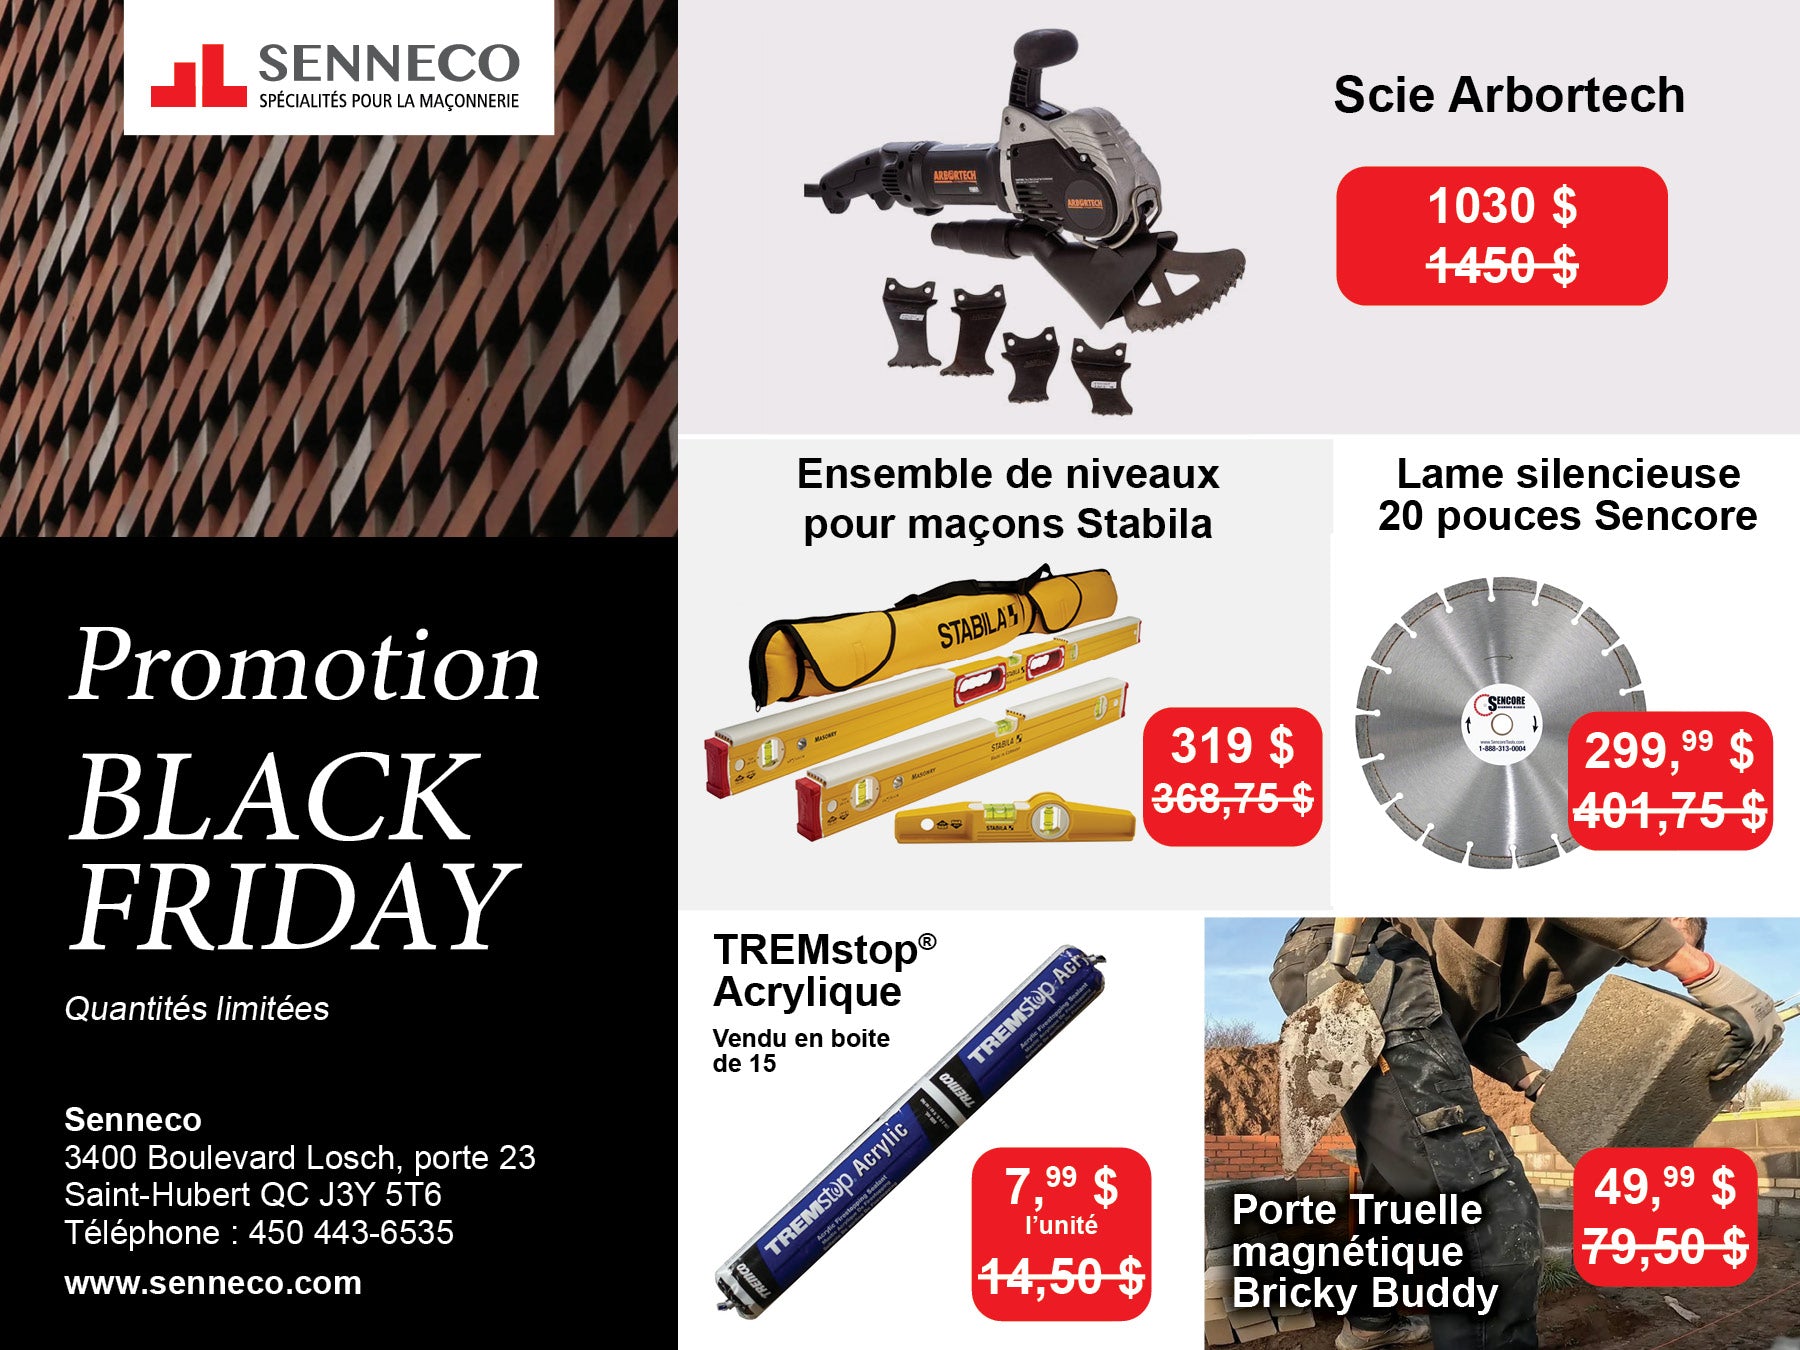 Promotions BLACK FRIDAY